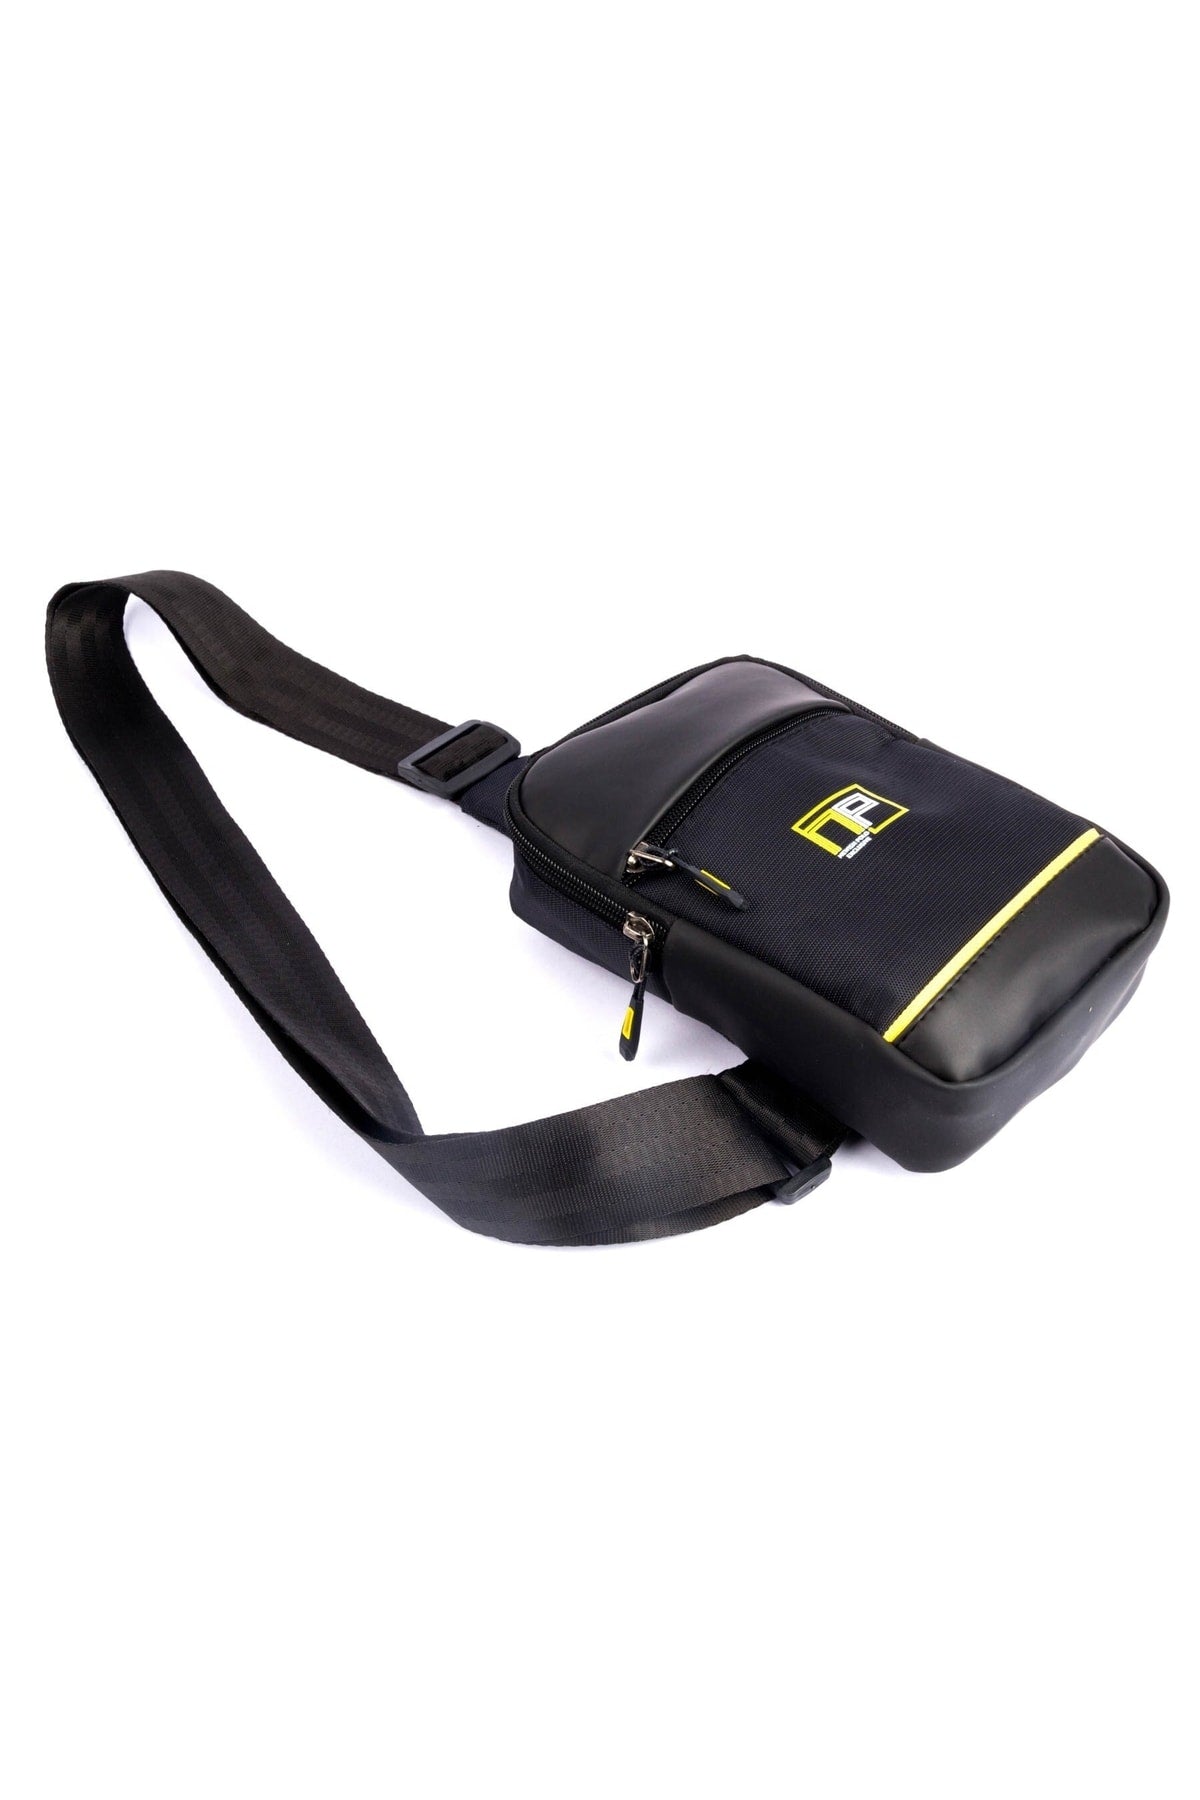 Unisex Impertex Chest Bag With Phone Compartment And Cross Shoulder Bag Suitable For Daily Use